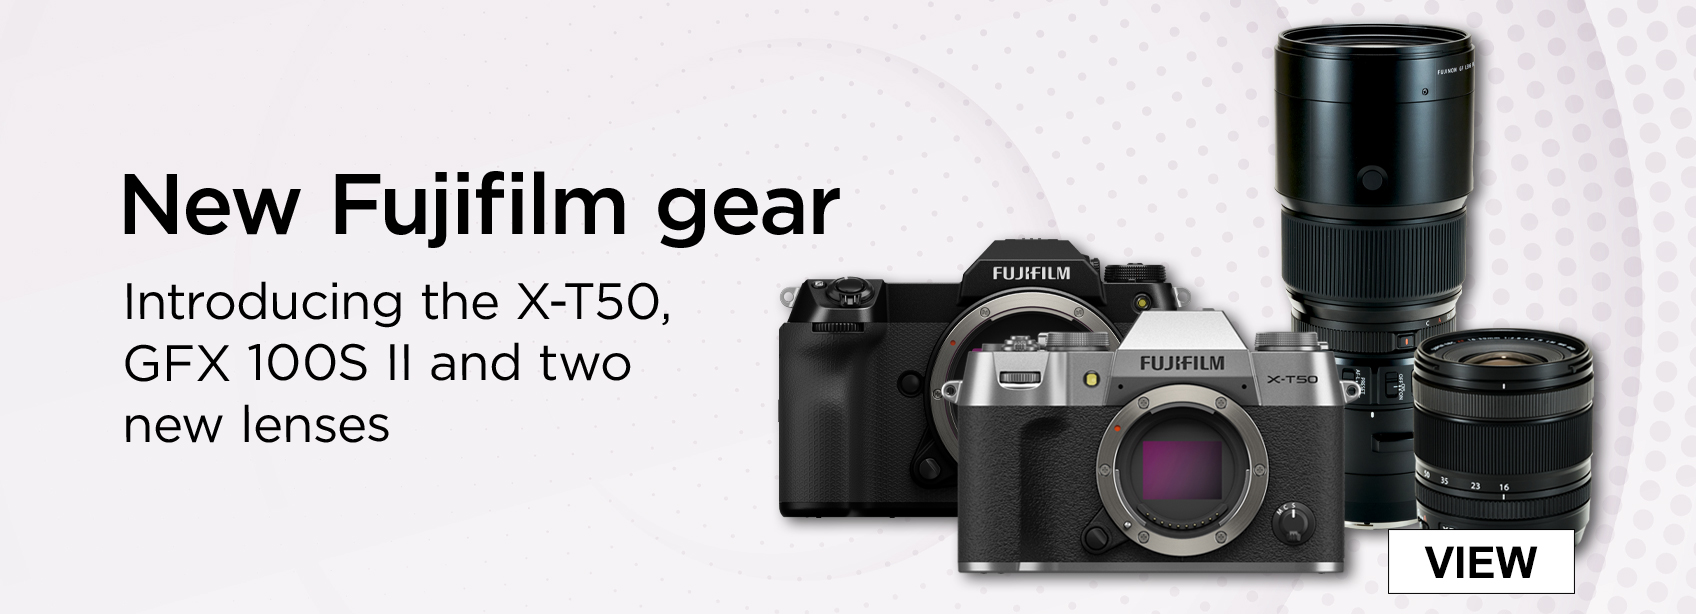 New Fujifilm Gear Introducing introducing the X-T50, GFX100SII and two new lenses